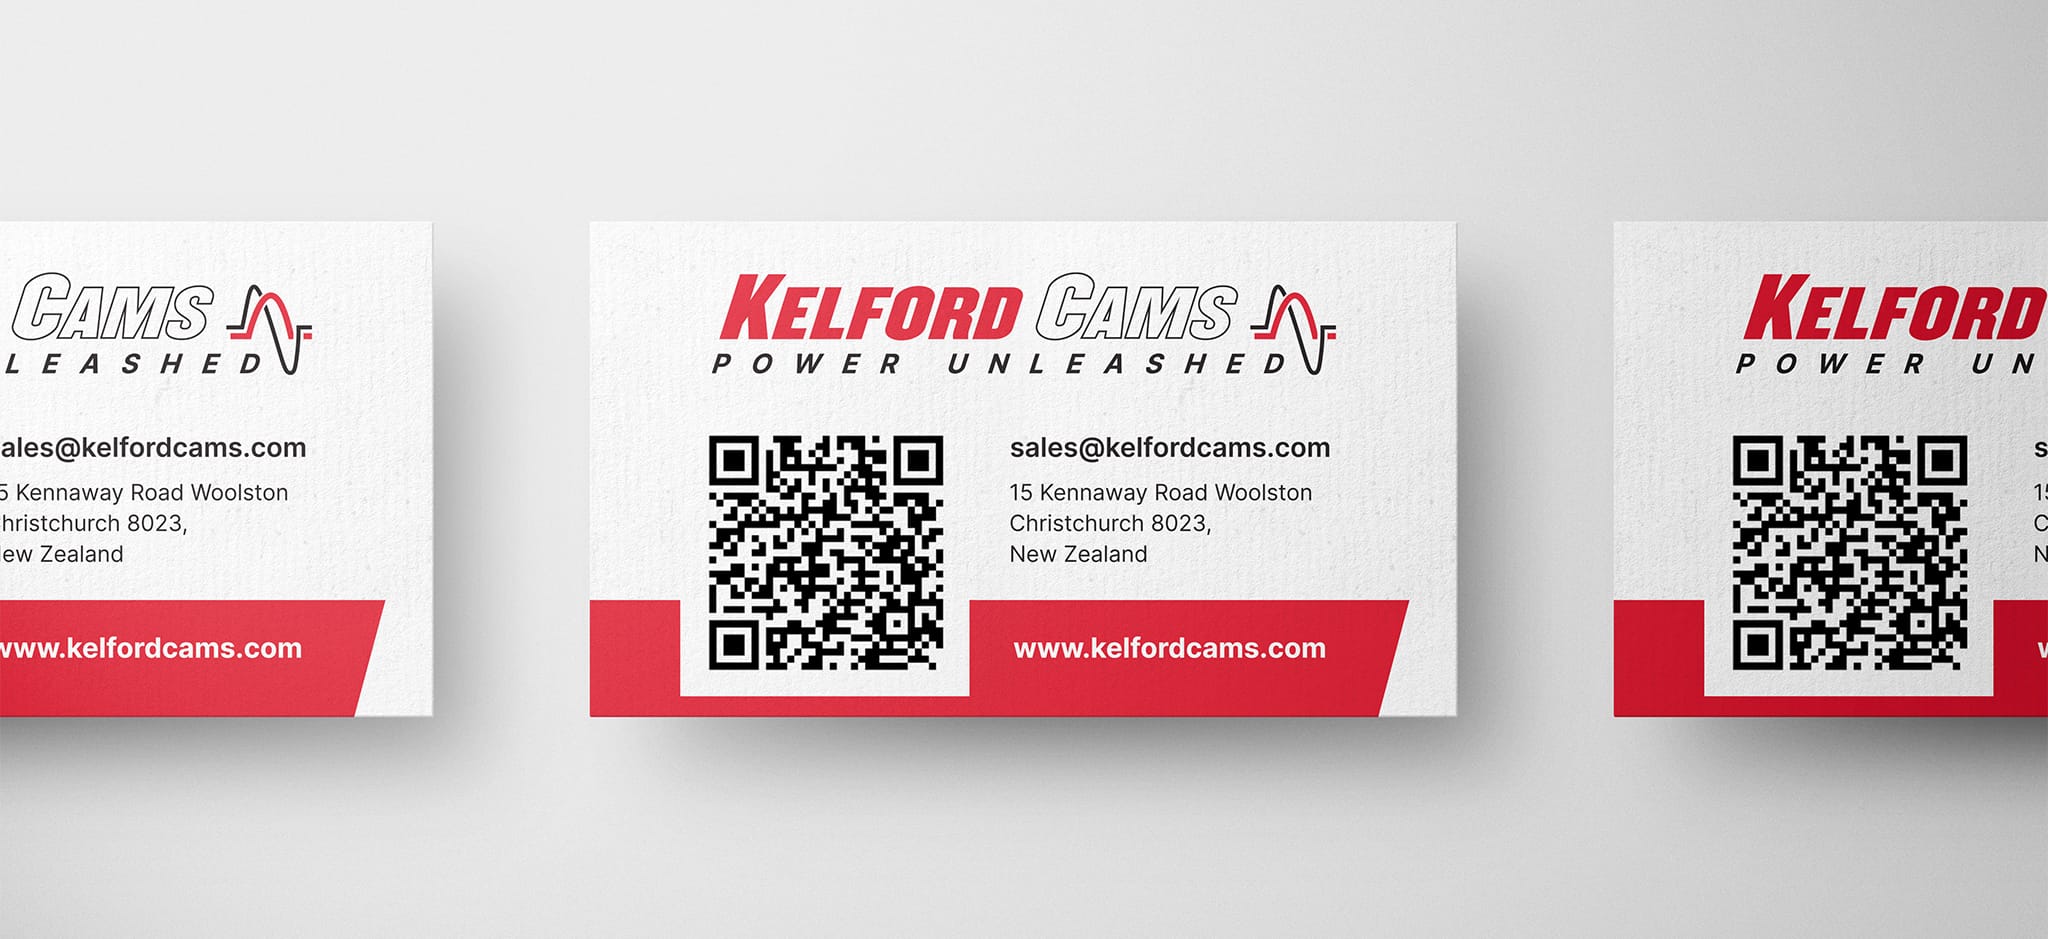 Kelford Cams business card design by MoMac Christchurch graphic designers